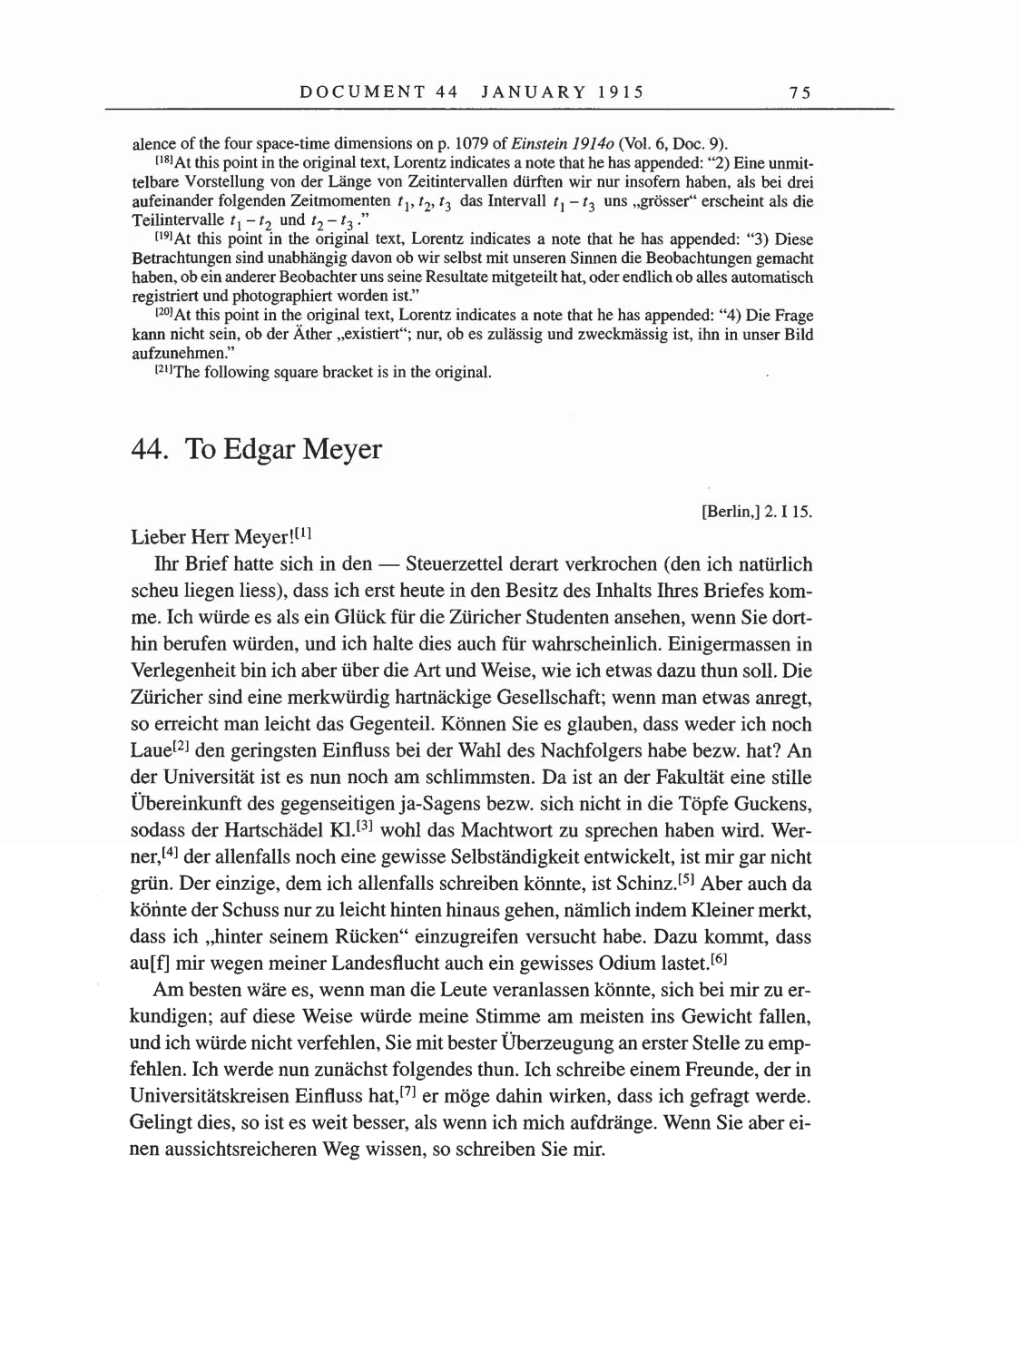 Volume 8, Part A: The Berlin Years: Correspondence 1914-1917 page 75